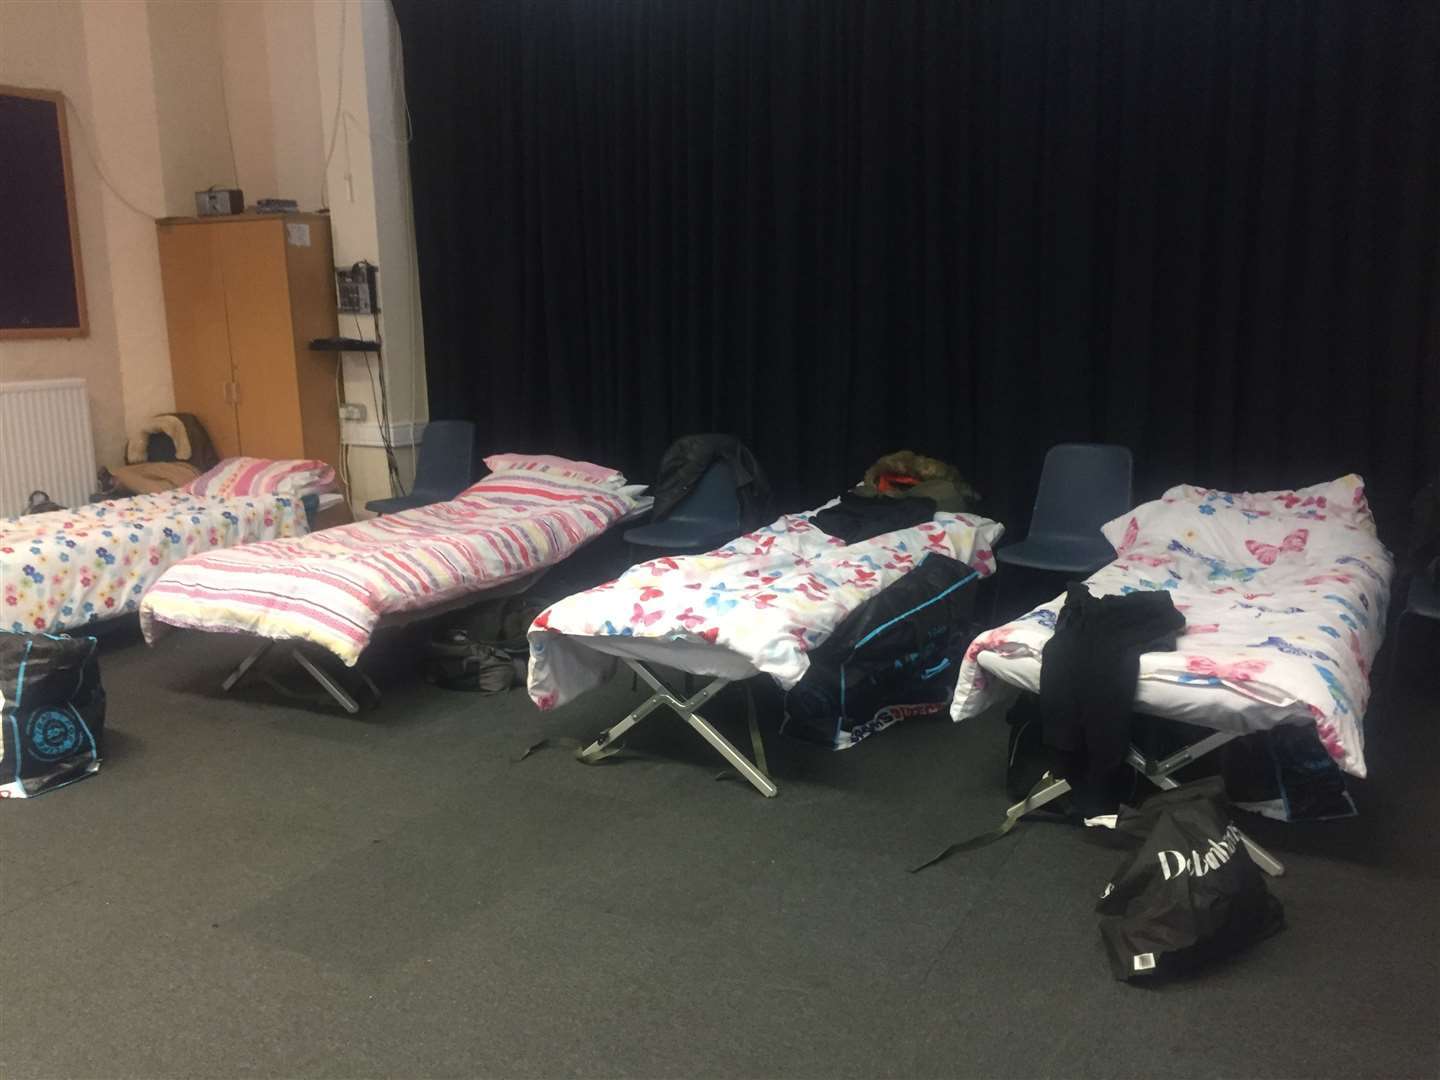 Mr Borovsky had previously been a guest at Folkestone's Winter Shelter, which provides a bed to the town's homeless